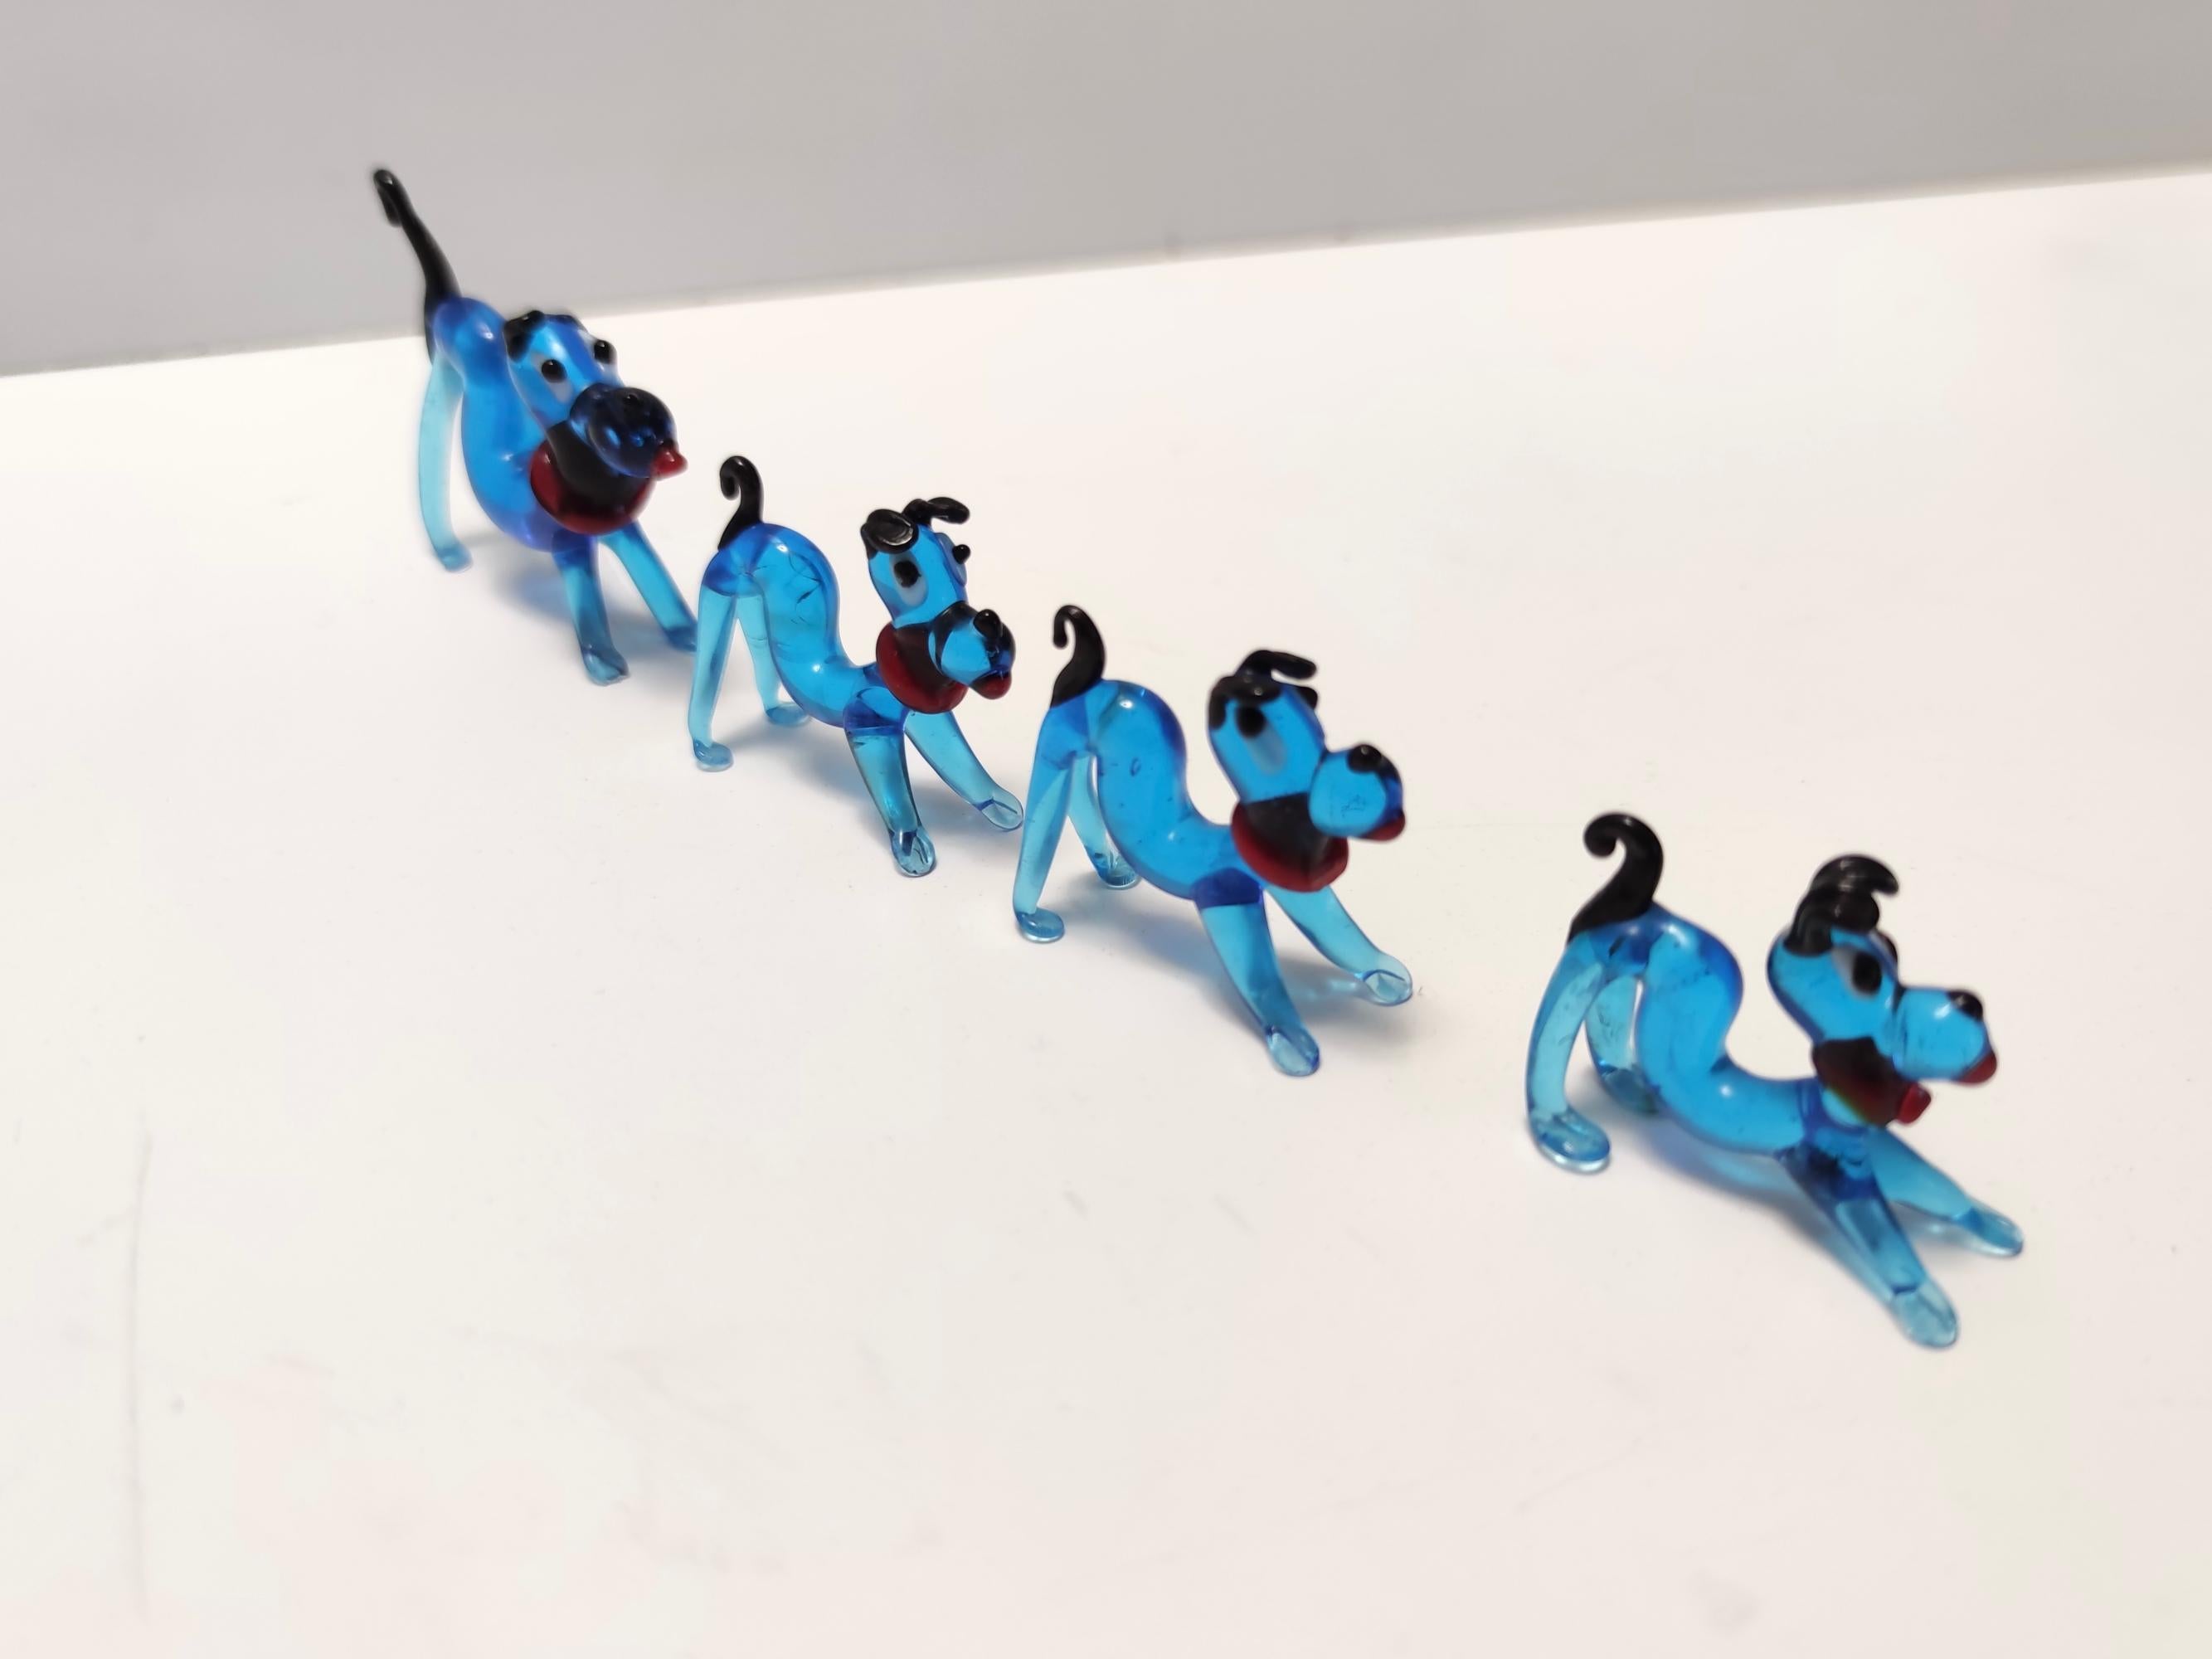 Mid-Century Modern The Collective of 47 Murano Glass Miniature Animals, Italy (collection vintage de 47 animaux miniatures en verre de Murano) en vente